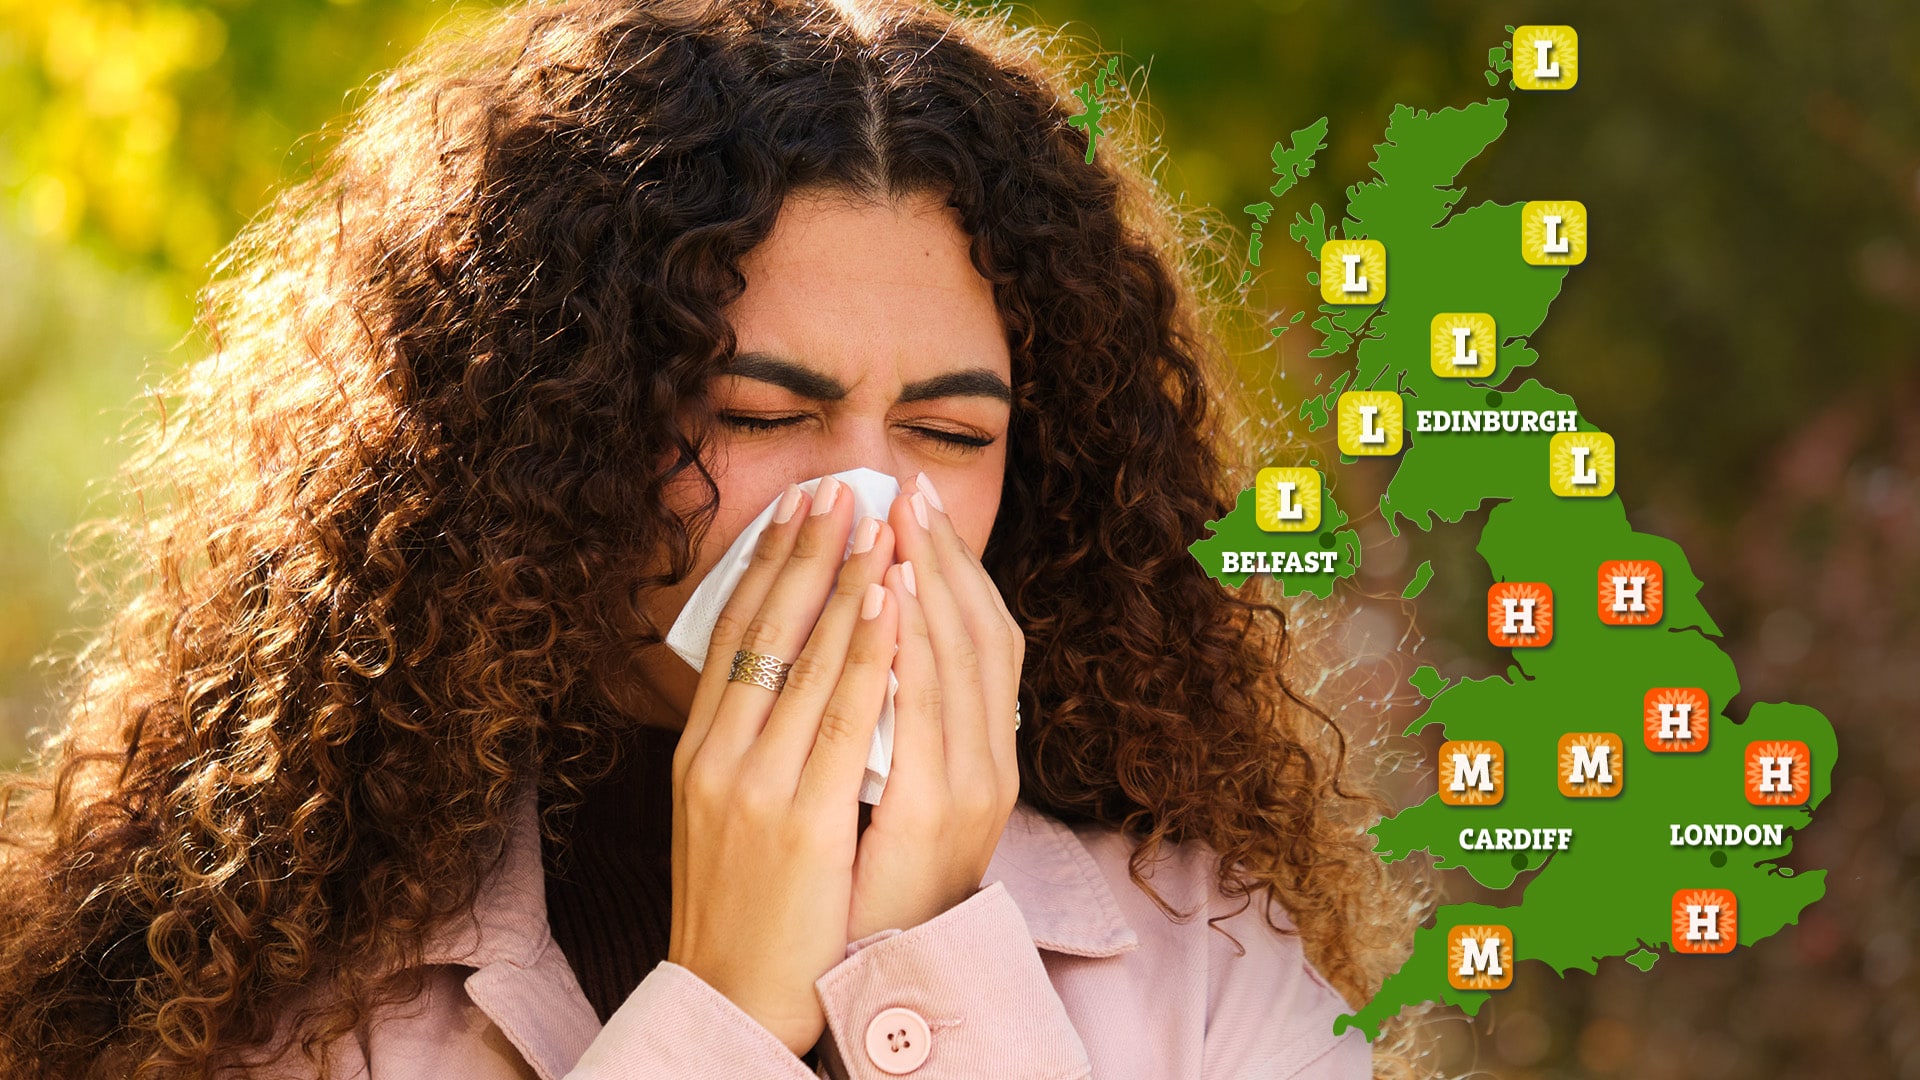 Pollen bomb’ set to explode in parts of UK this weekend – map reveals areas worst affected [Video]